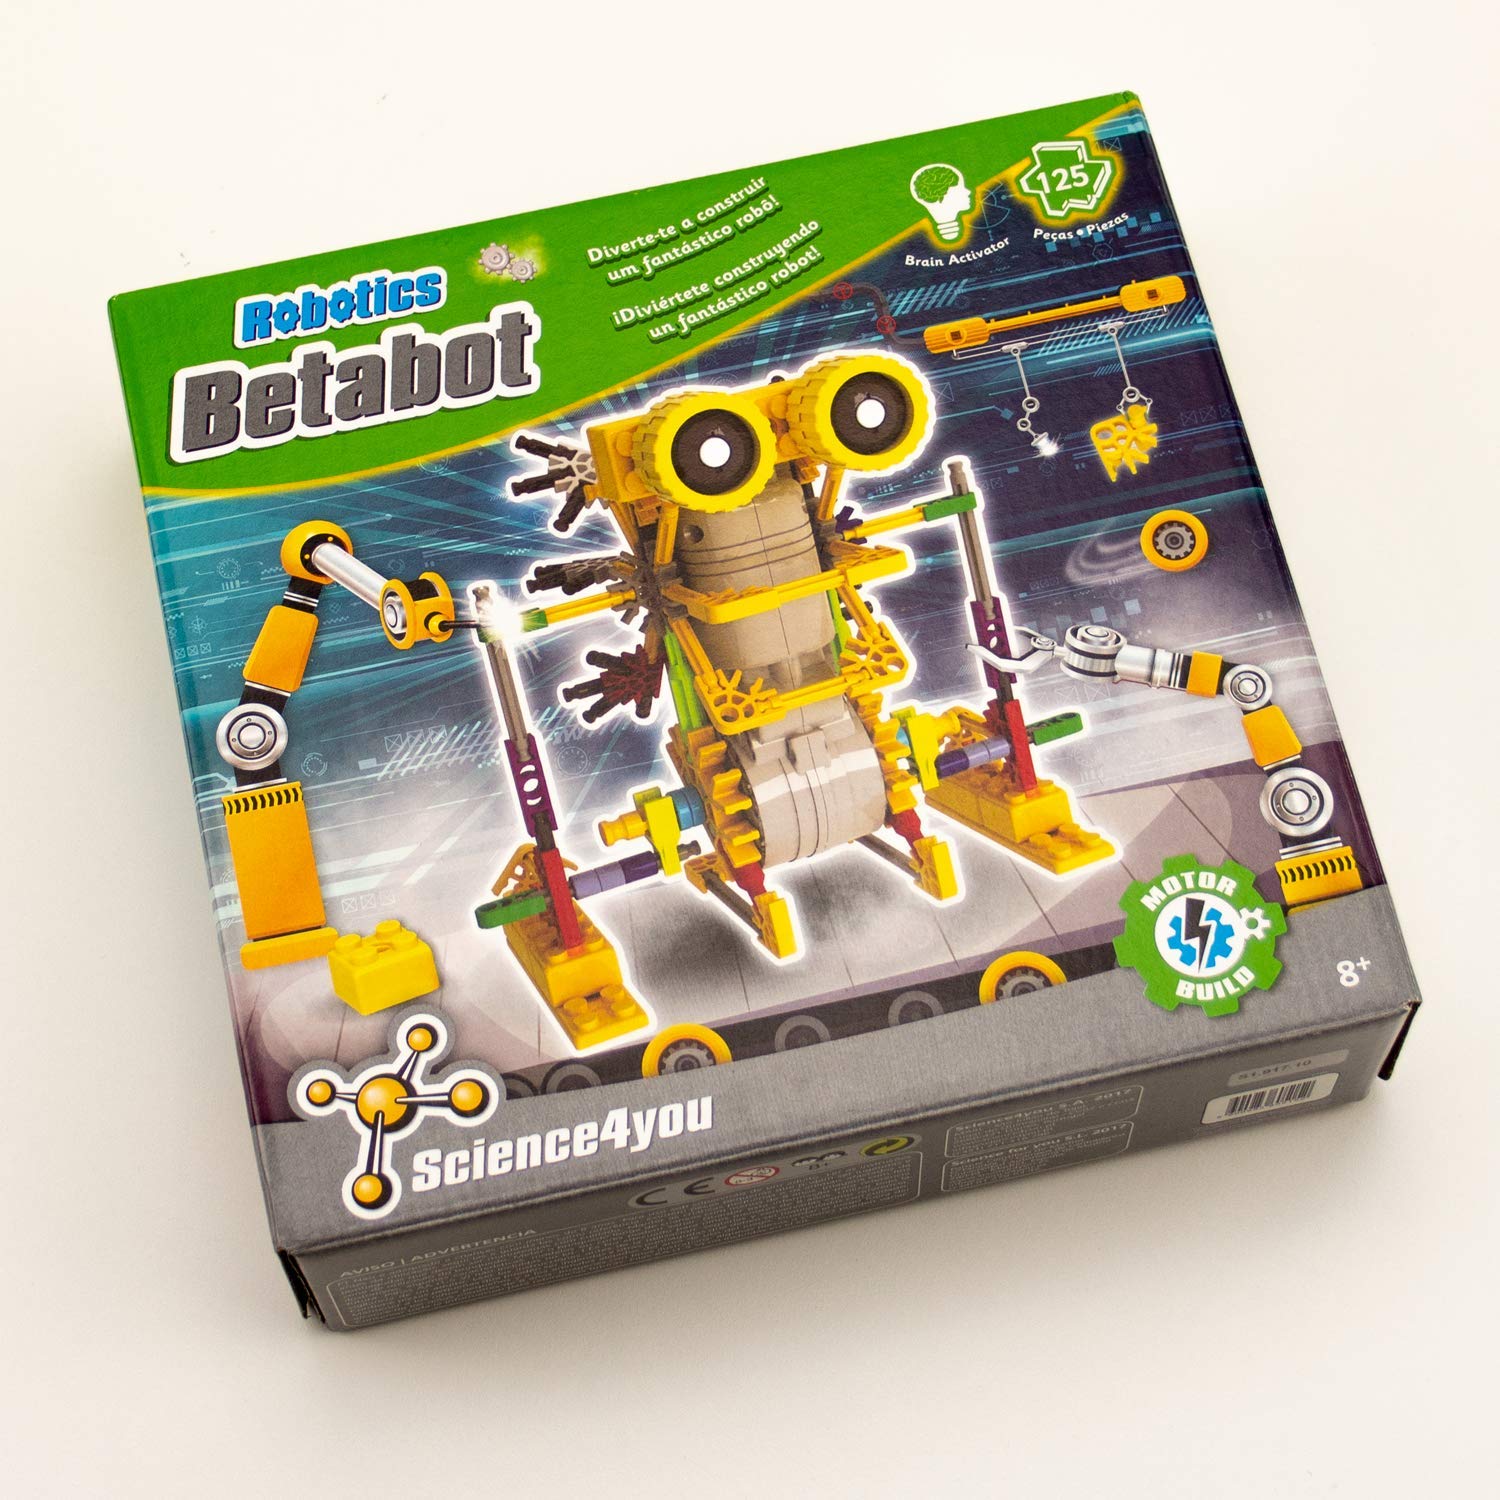 Betabot Robot Building Kit for Kids 8-14 Years Build Your Own 